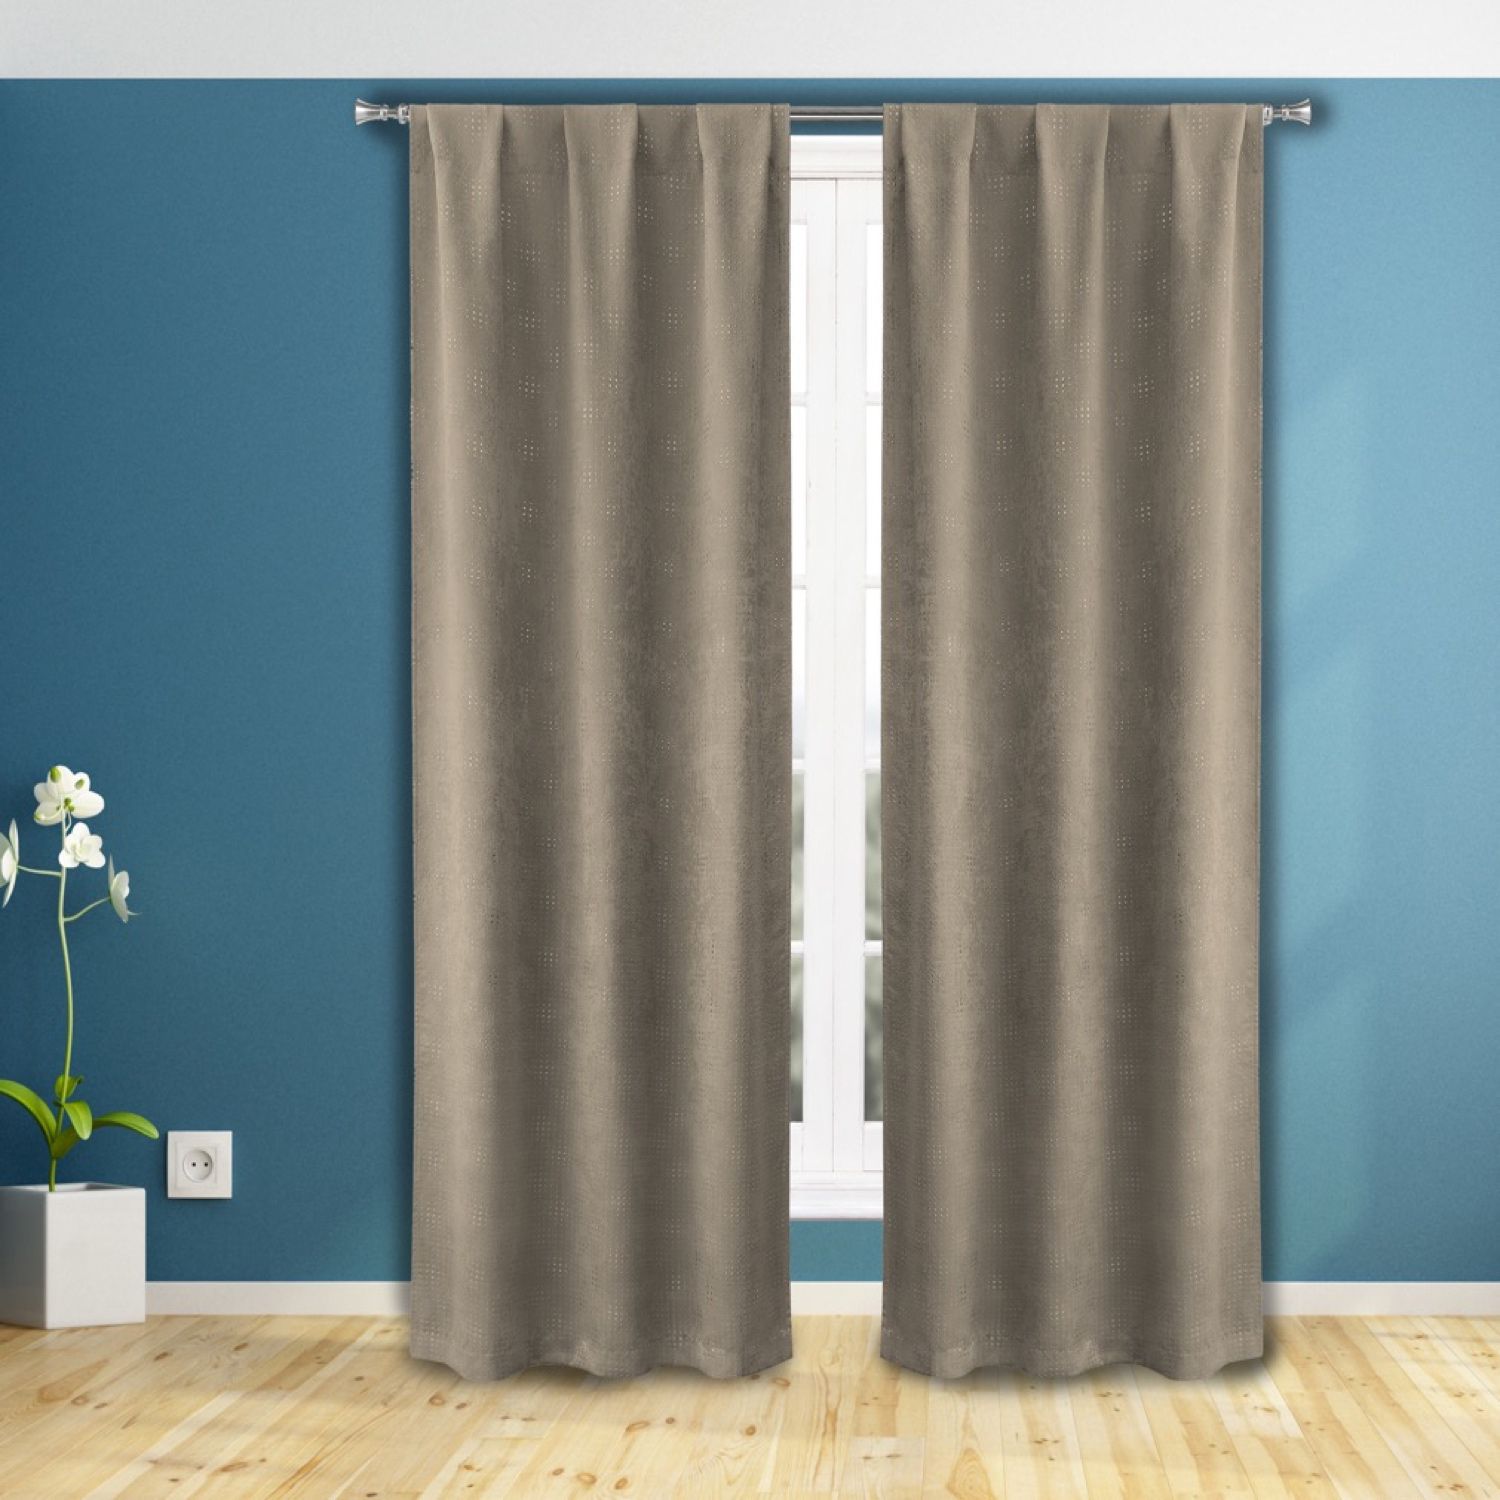 Image for Home Maison Vennay Metallic 2-pack Window Curtain Set at Kohl's.